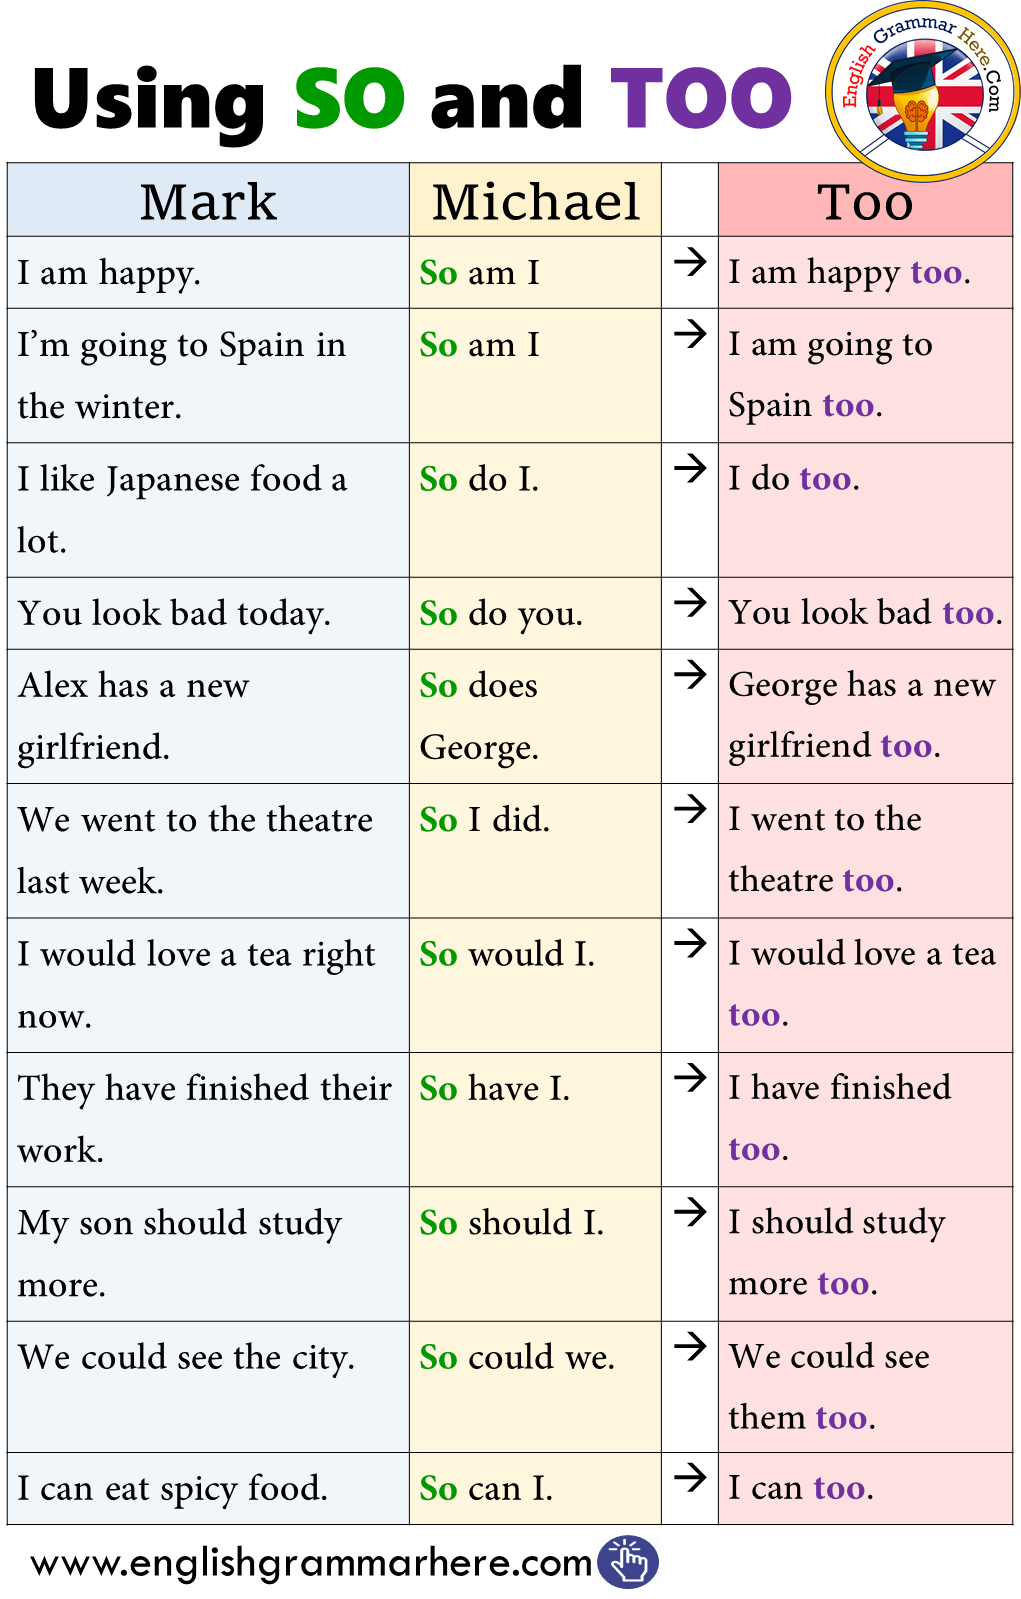 Using SO and TOO in English